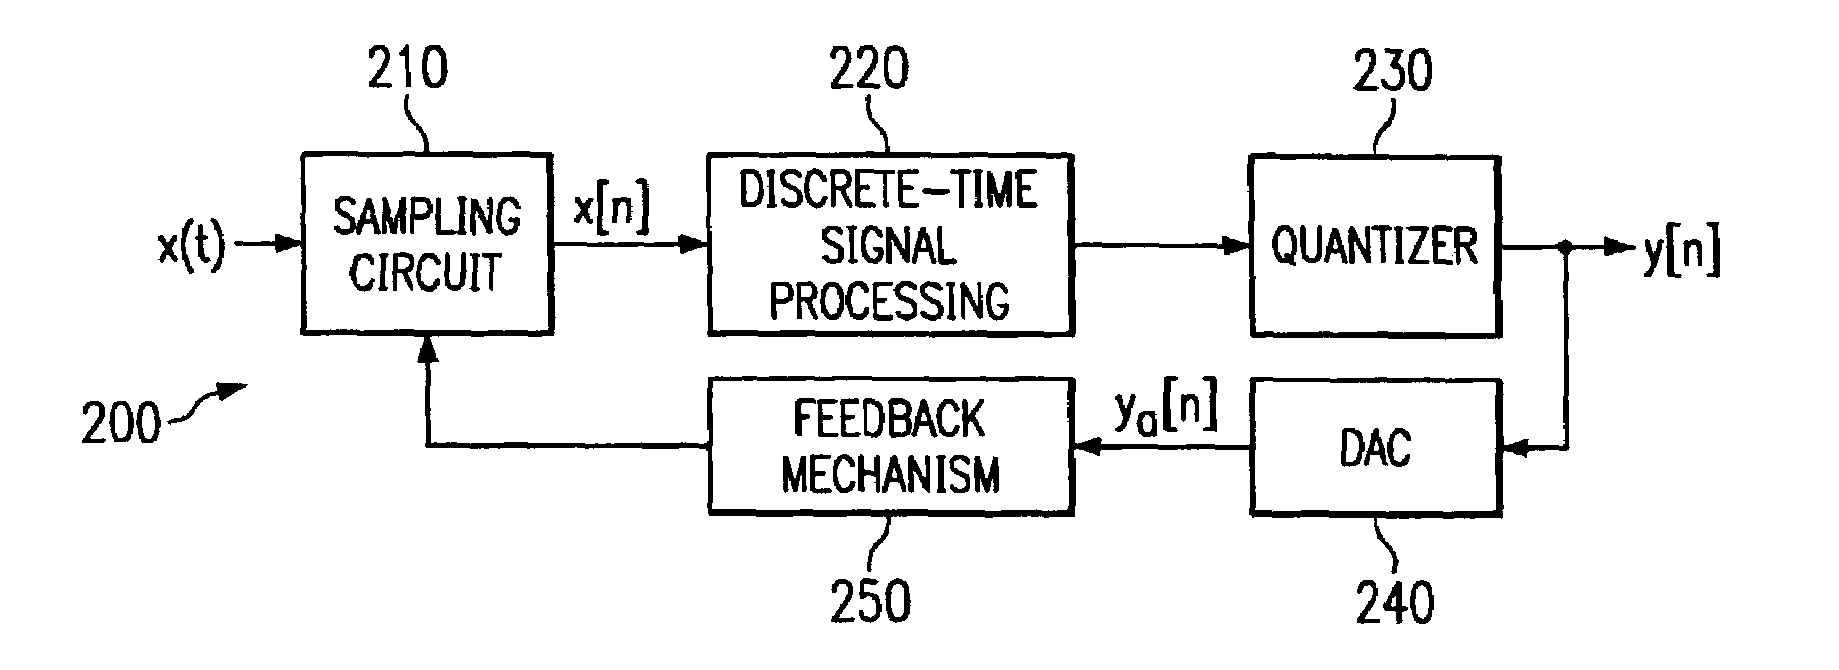 Sigma-delta (SigmaDelta) analog-to-digital converter (ADC) structure incorporating a direct sampling mixer